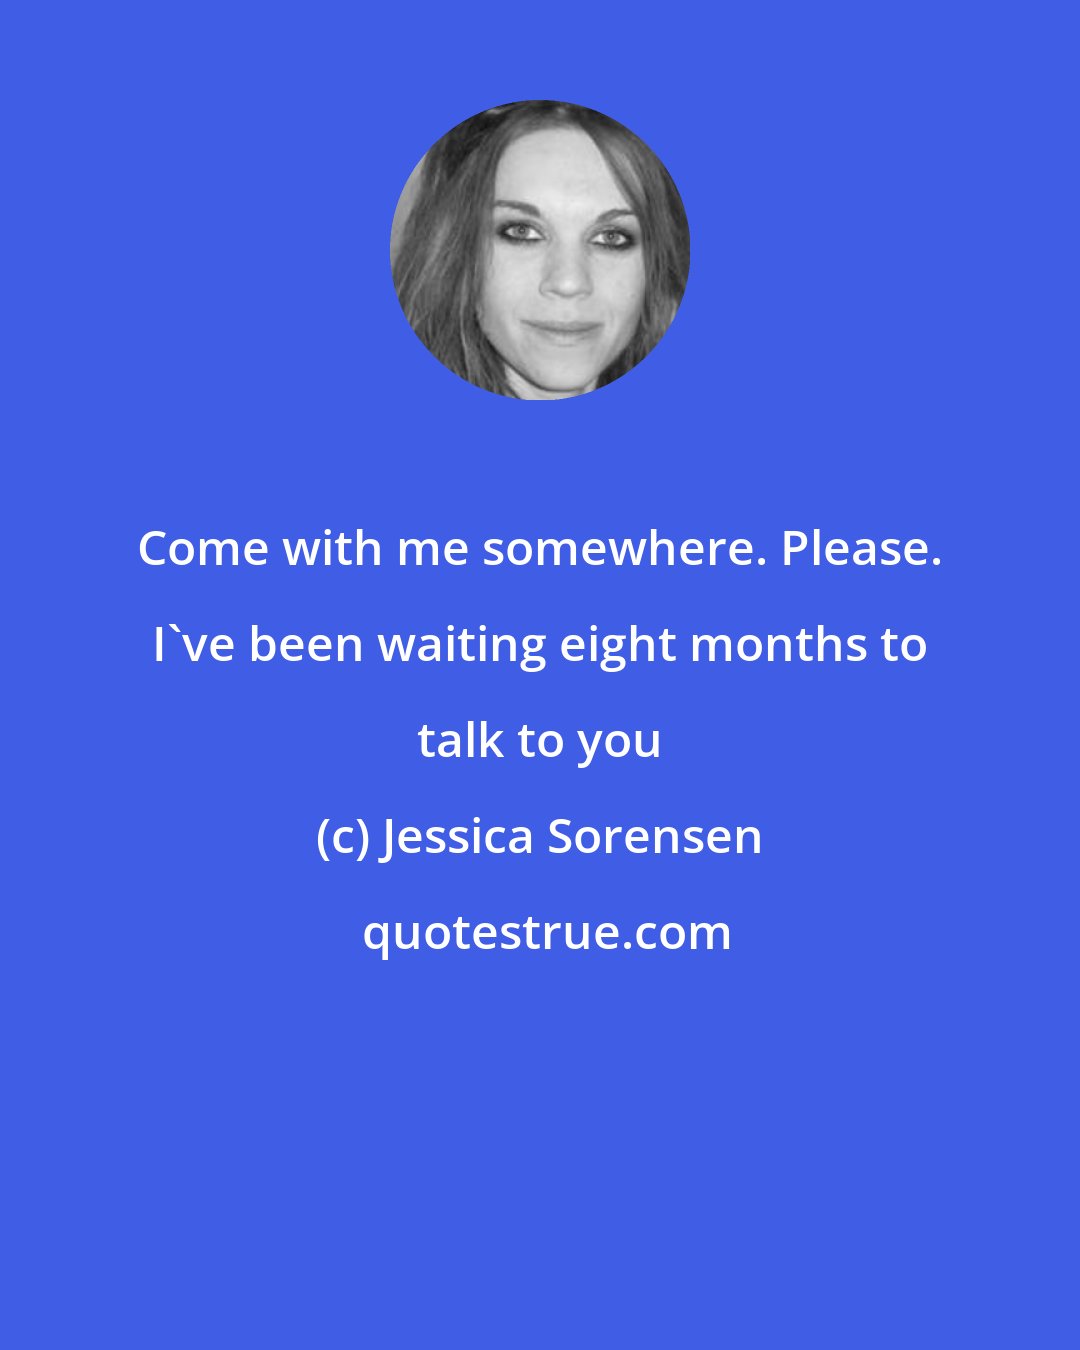 Jessica Sorensen: Come with me somewhere. Please. I've been waiting eight months to talk to you